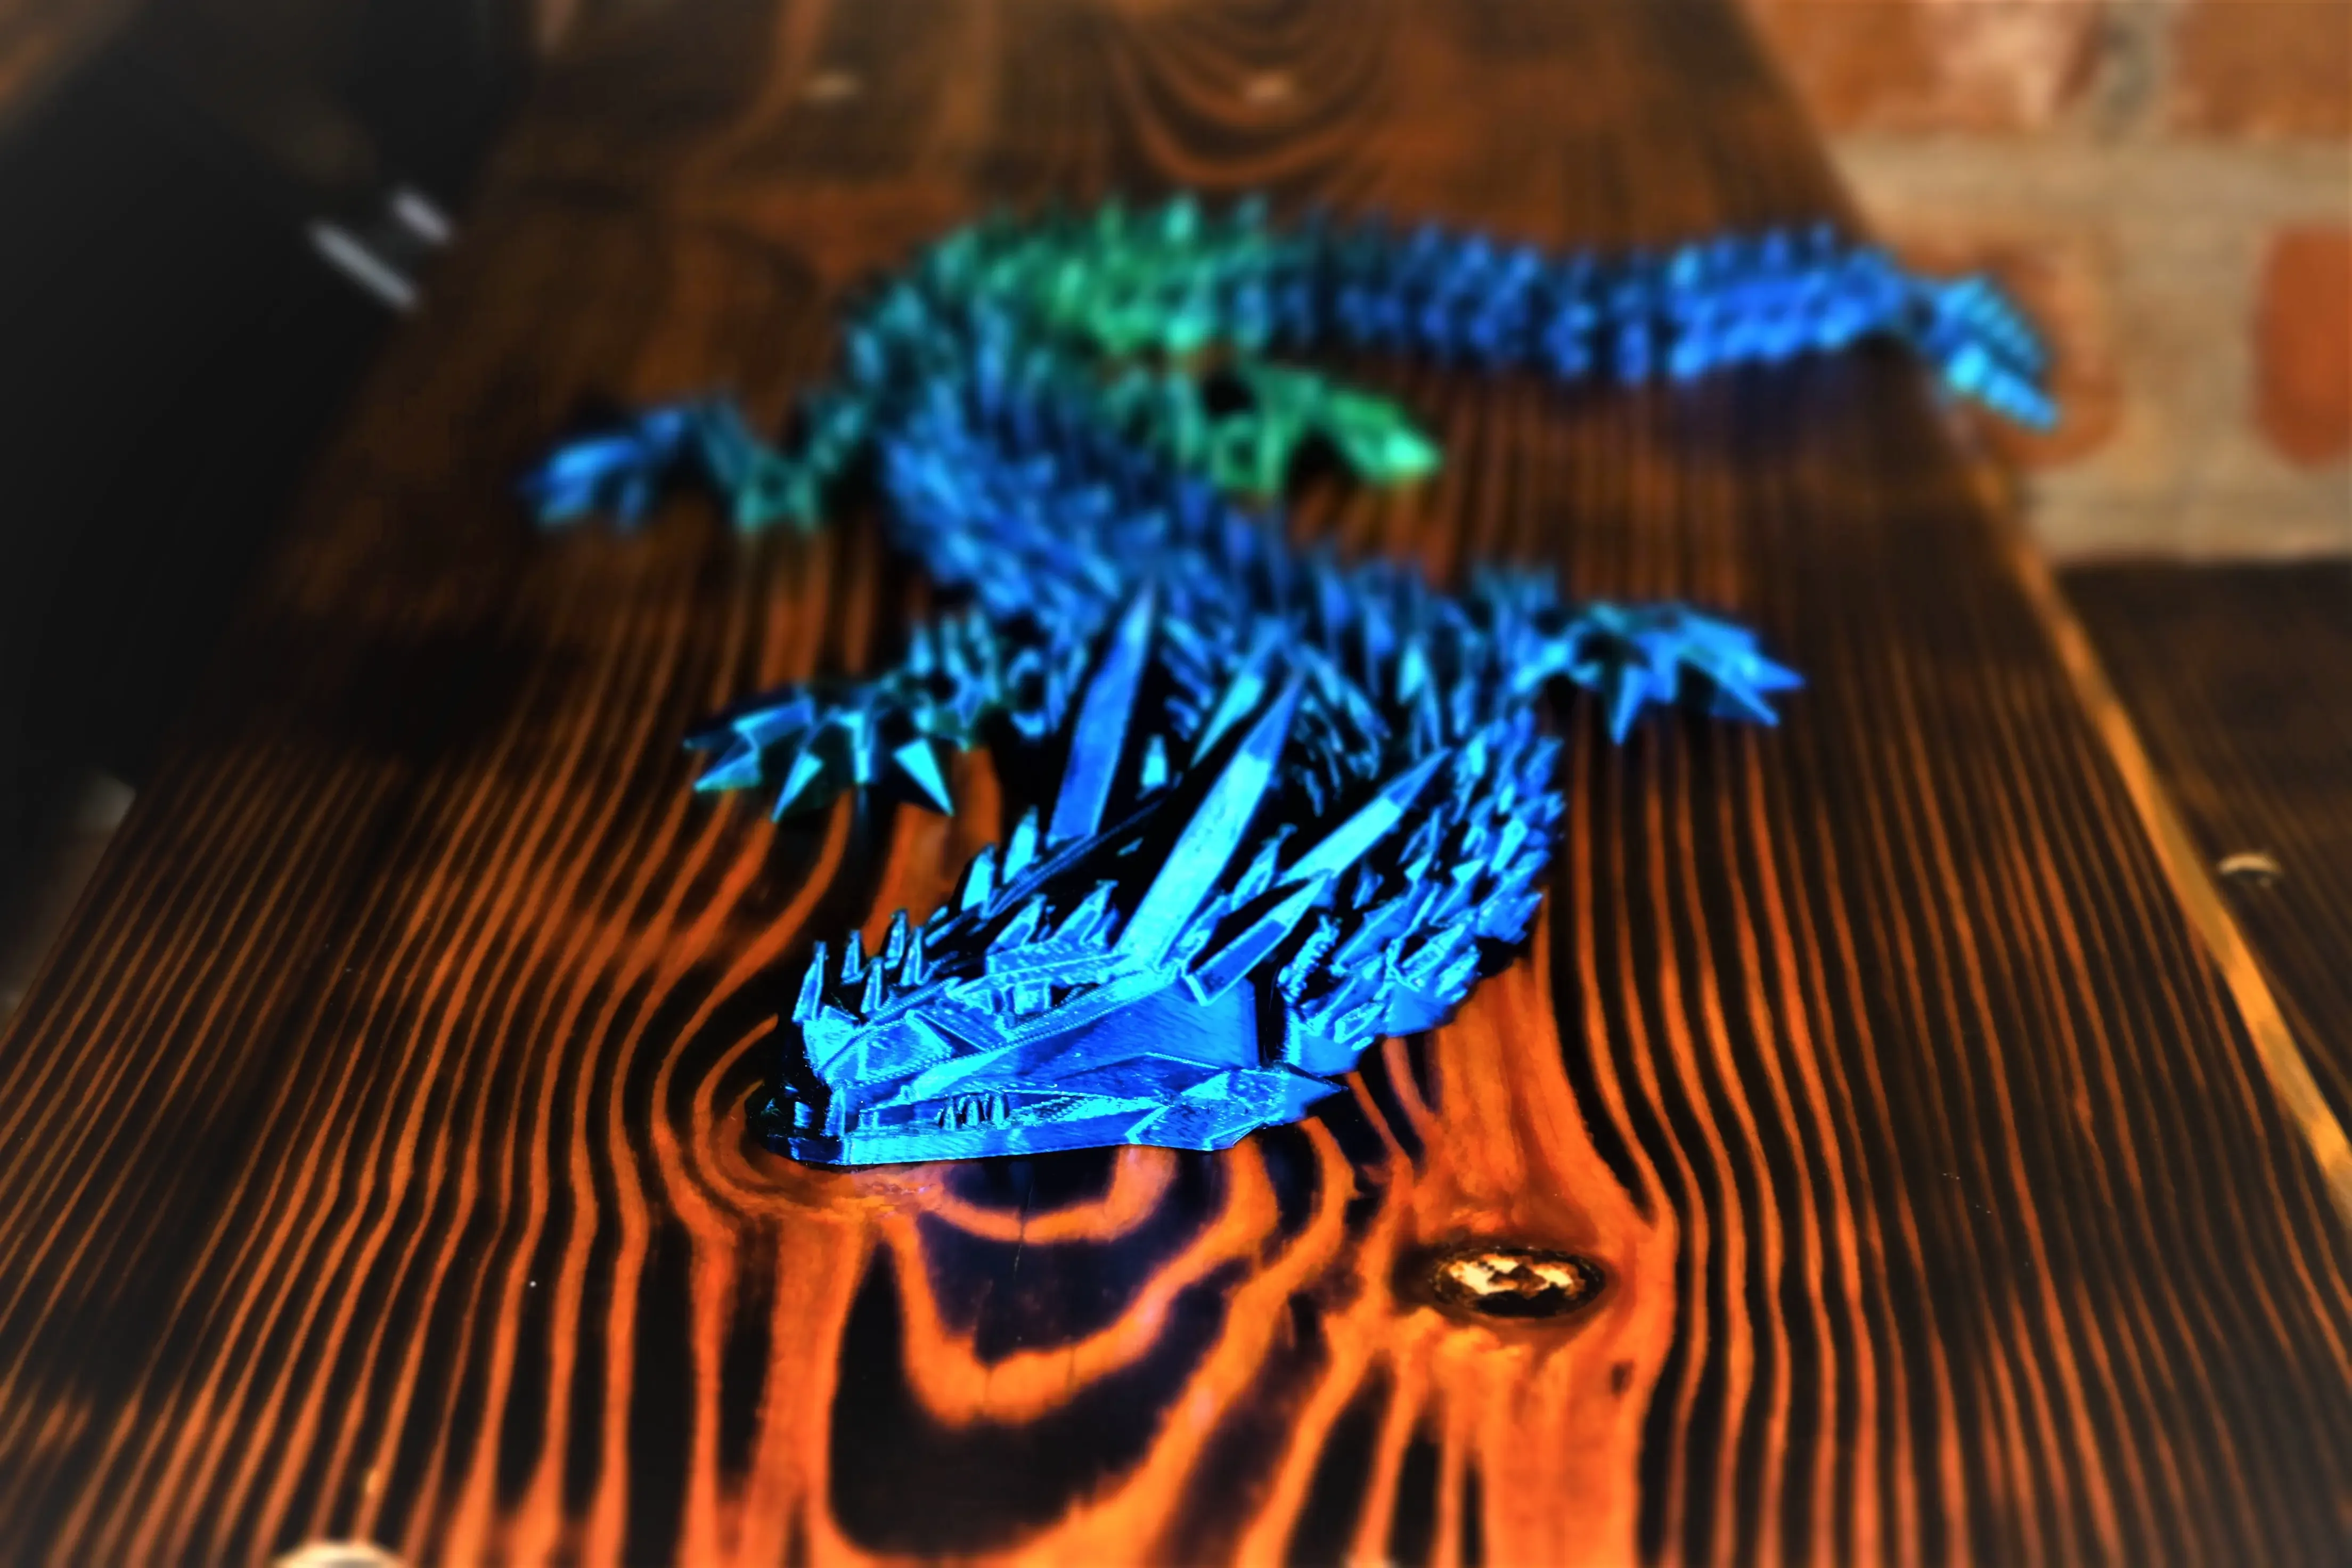 Ice Dragon - Print-in-Place